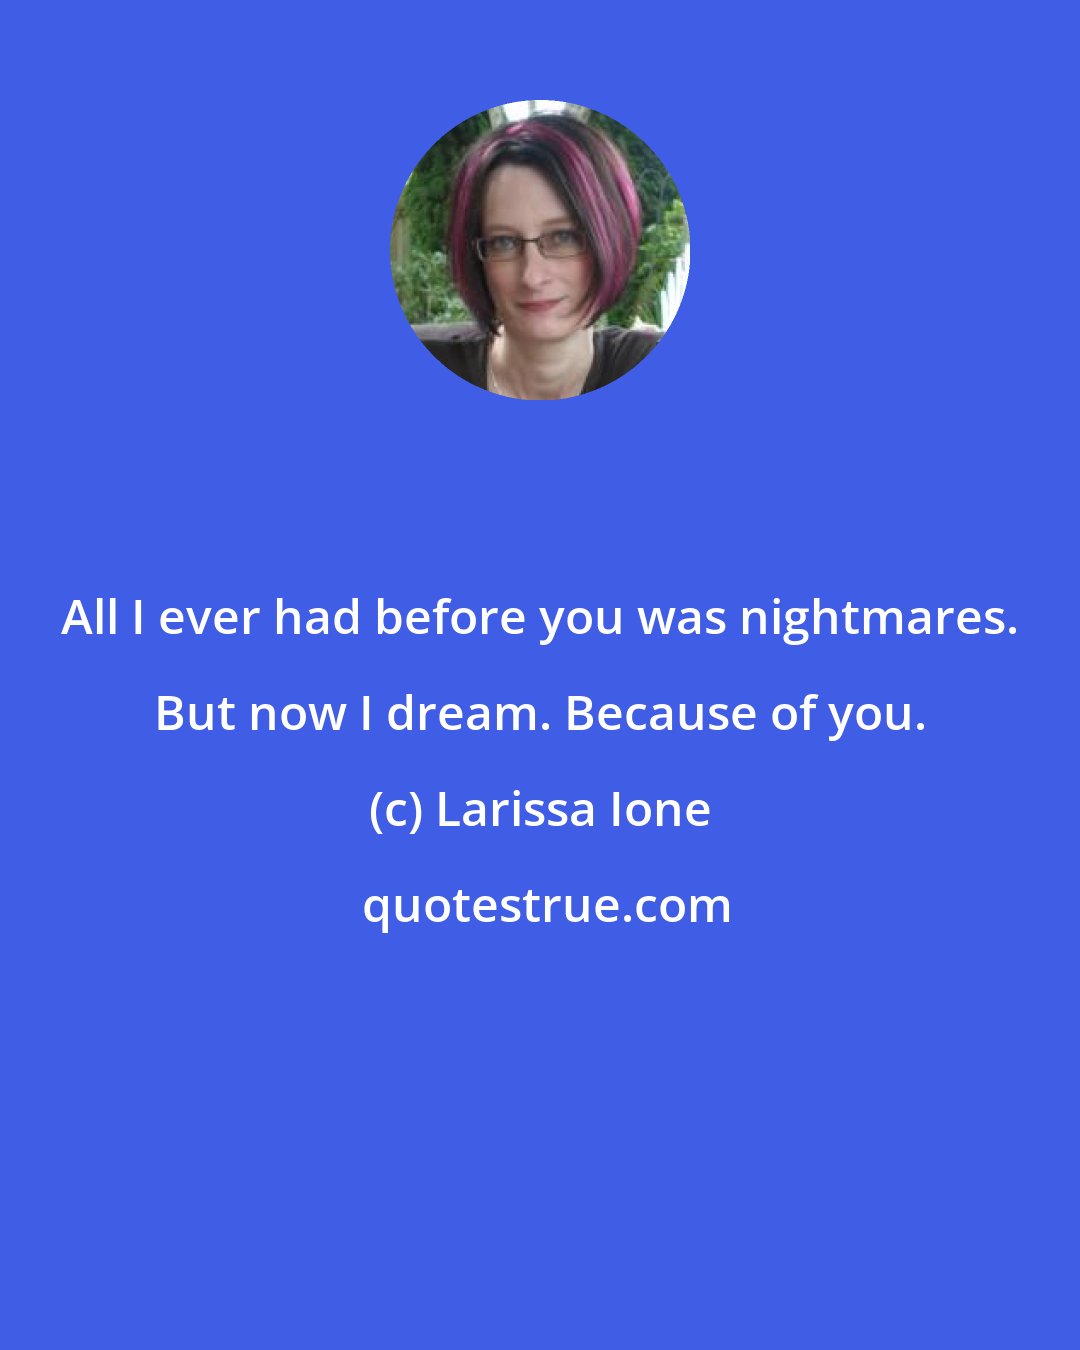 Larissa Ione: All I ever had before you was nightmares. But now I dream. Because of you.